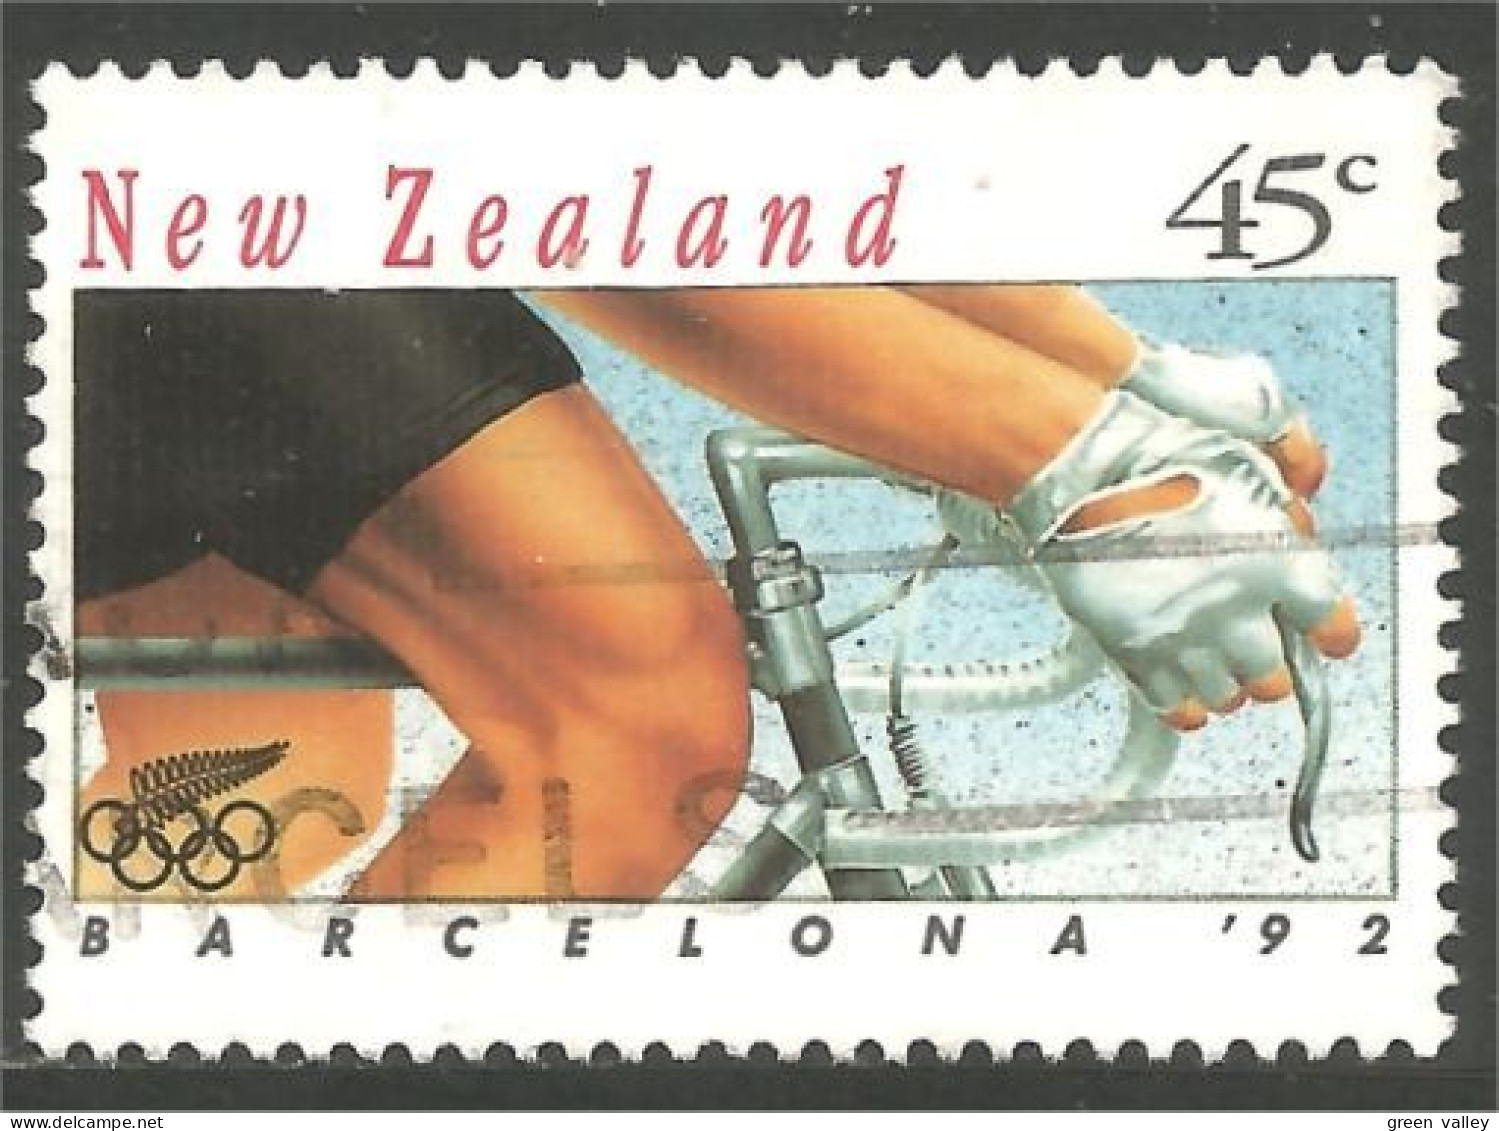 706 New Zealand Olympiques Barcelone Cycling Bicycle Race Fahrrad Bicyclette Vélo Cyclisme (NZ-155e) - Gebraucht